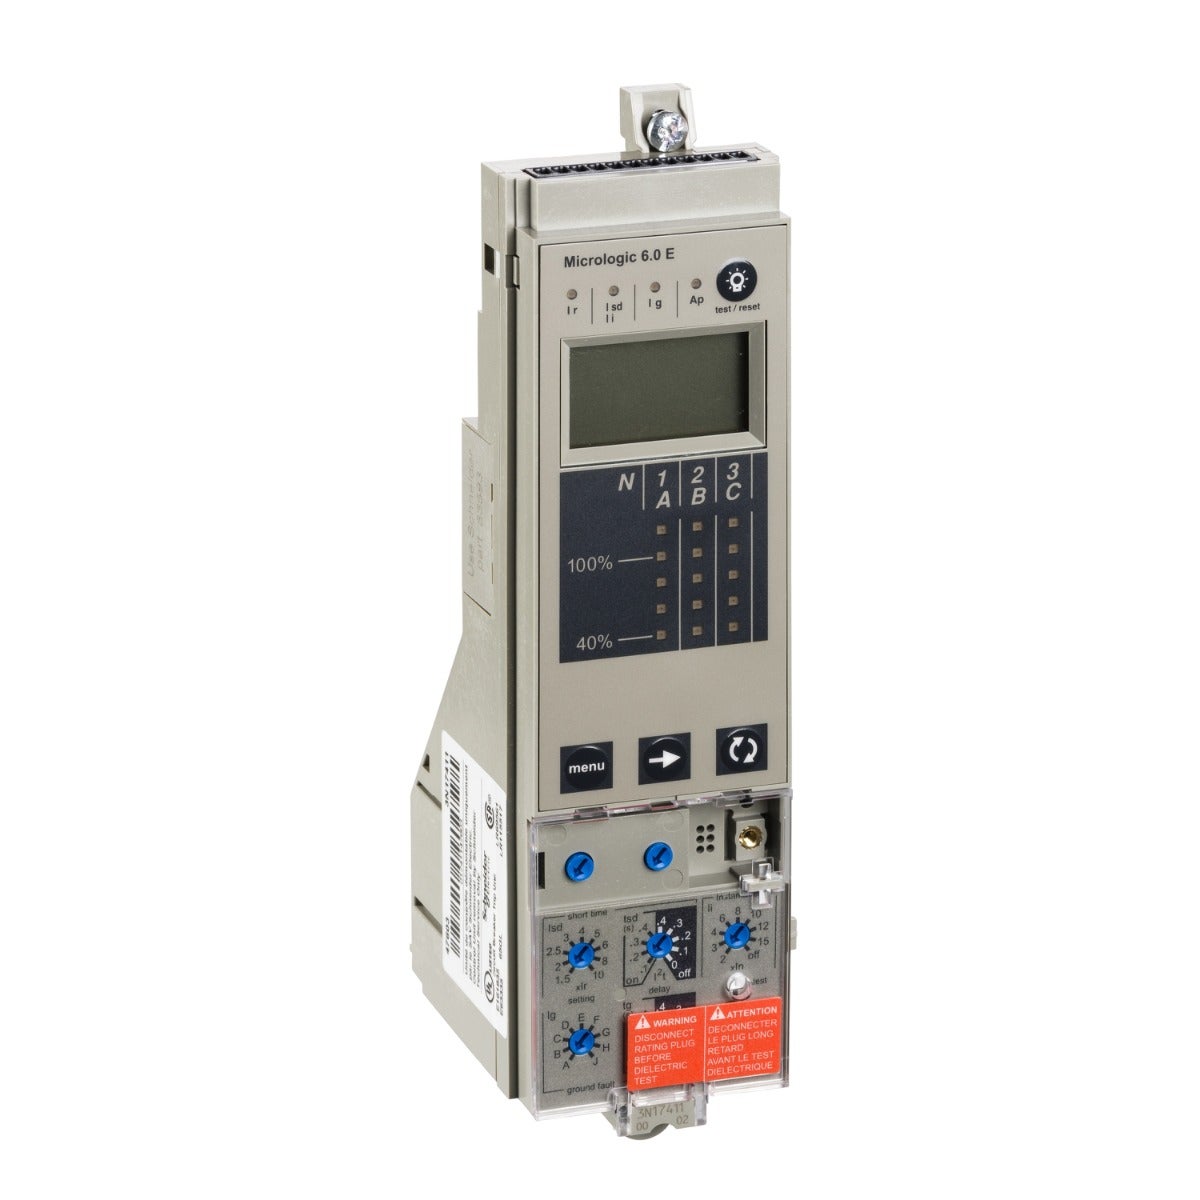 control unit Micrologic 6.0 E, selective and earth fault protections LSIG, energy meter measurement (Pre-Order 45 days)